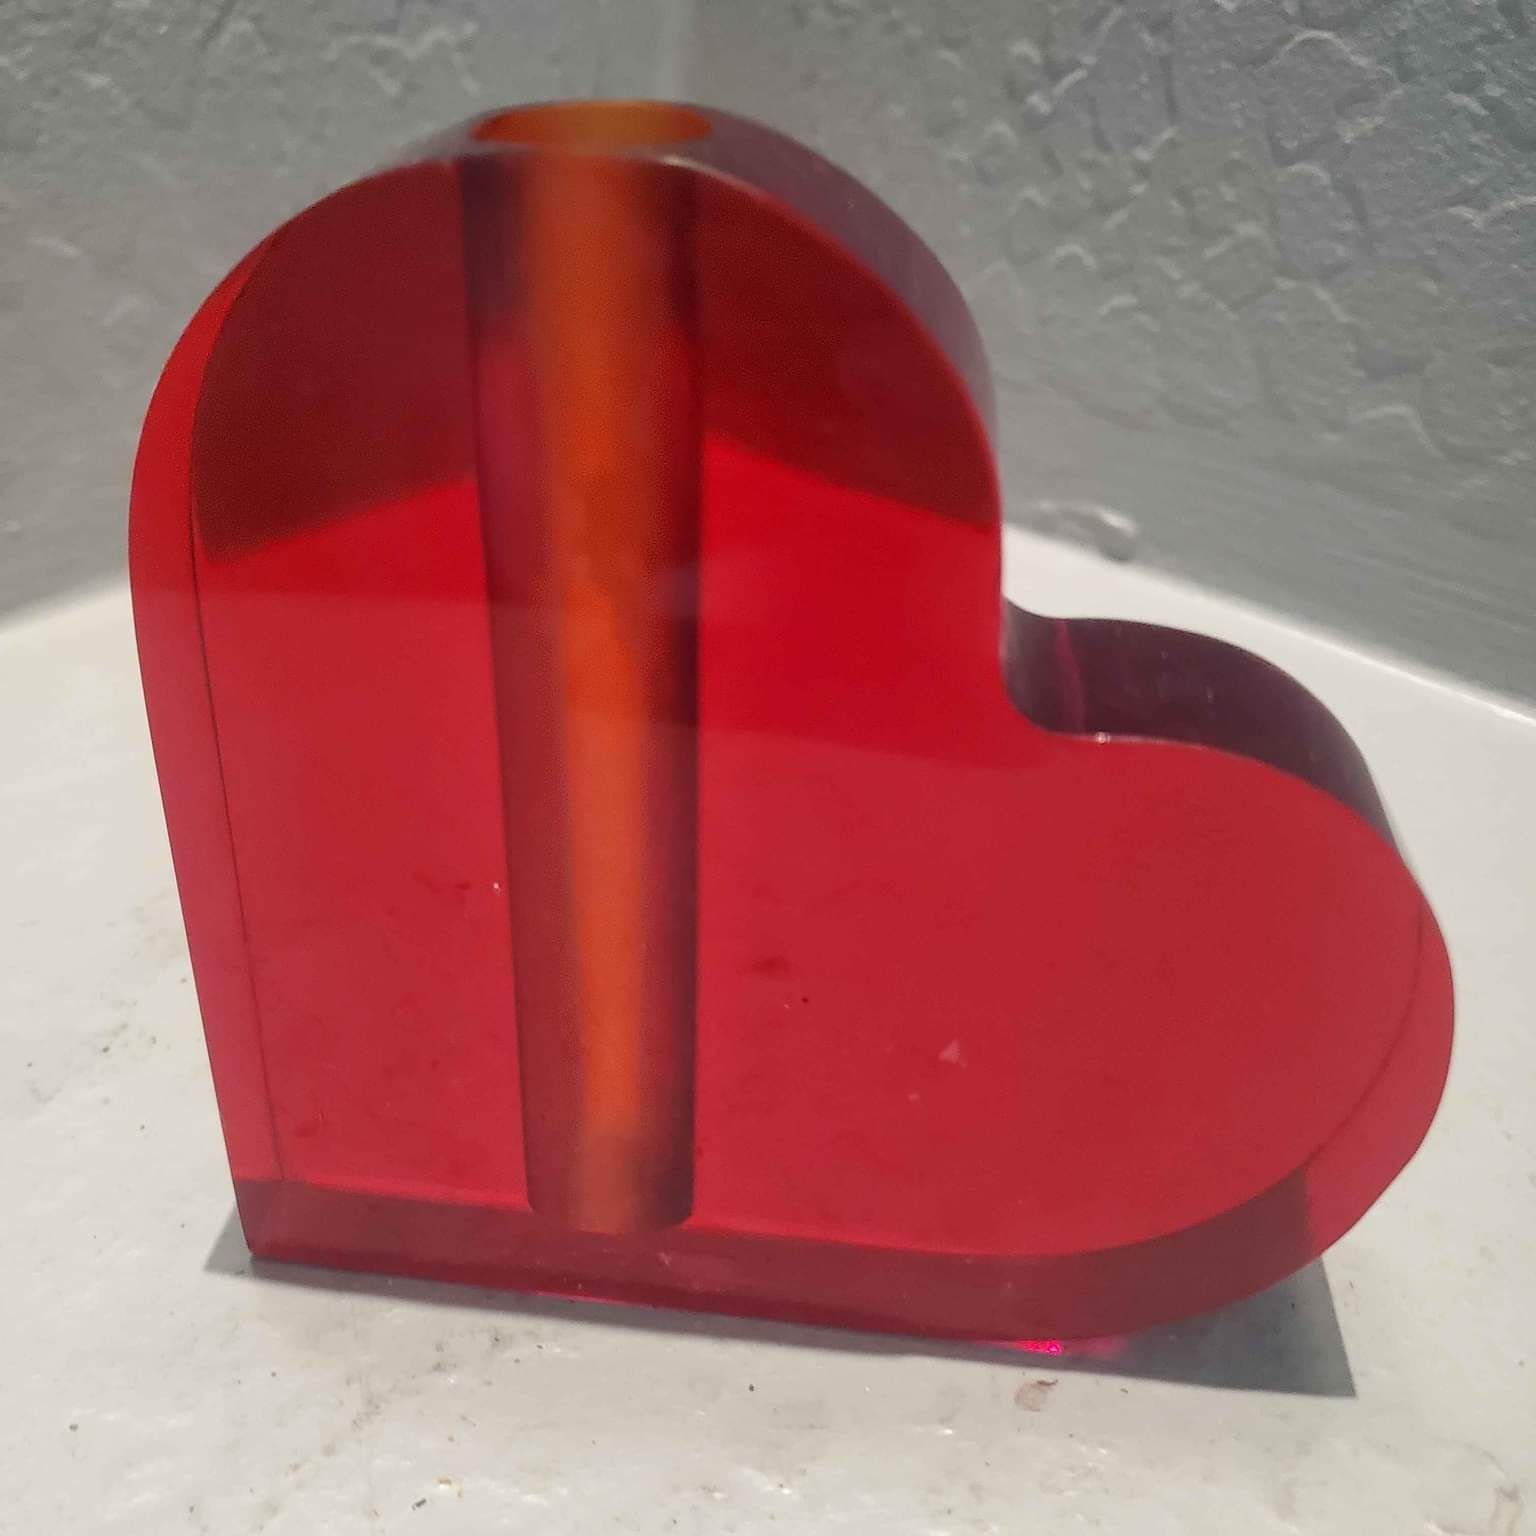 Red Heart Shaped Bud Vase Lucite RZoqET66T